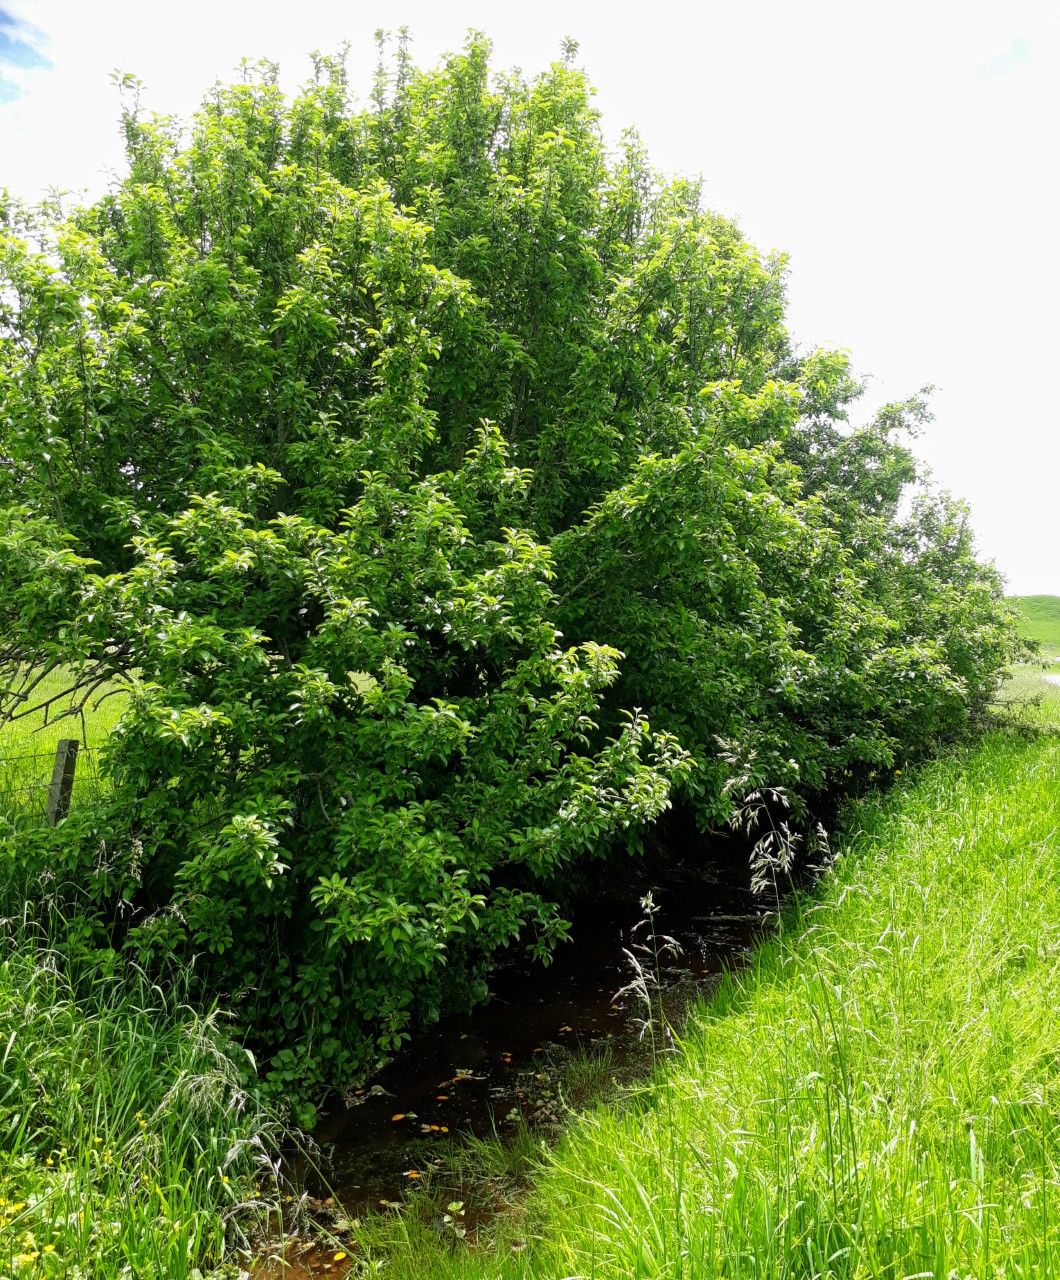 Wild seedling apple trees by the roadside ditch